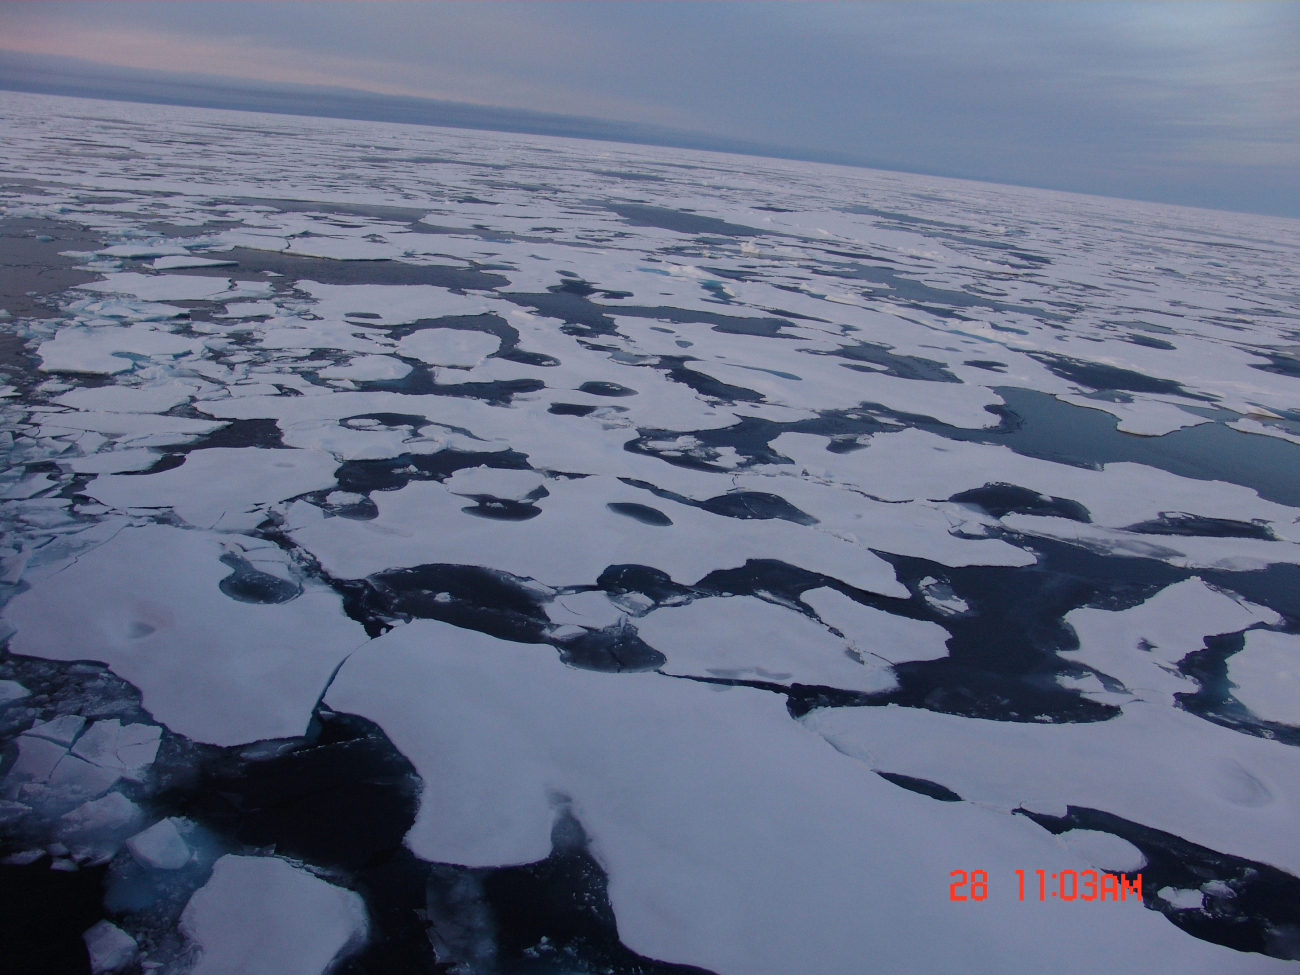 Relatively smooth ice floes in first-year ice